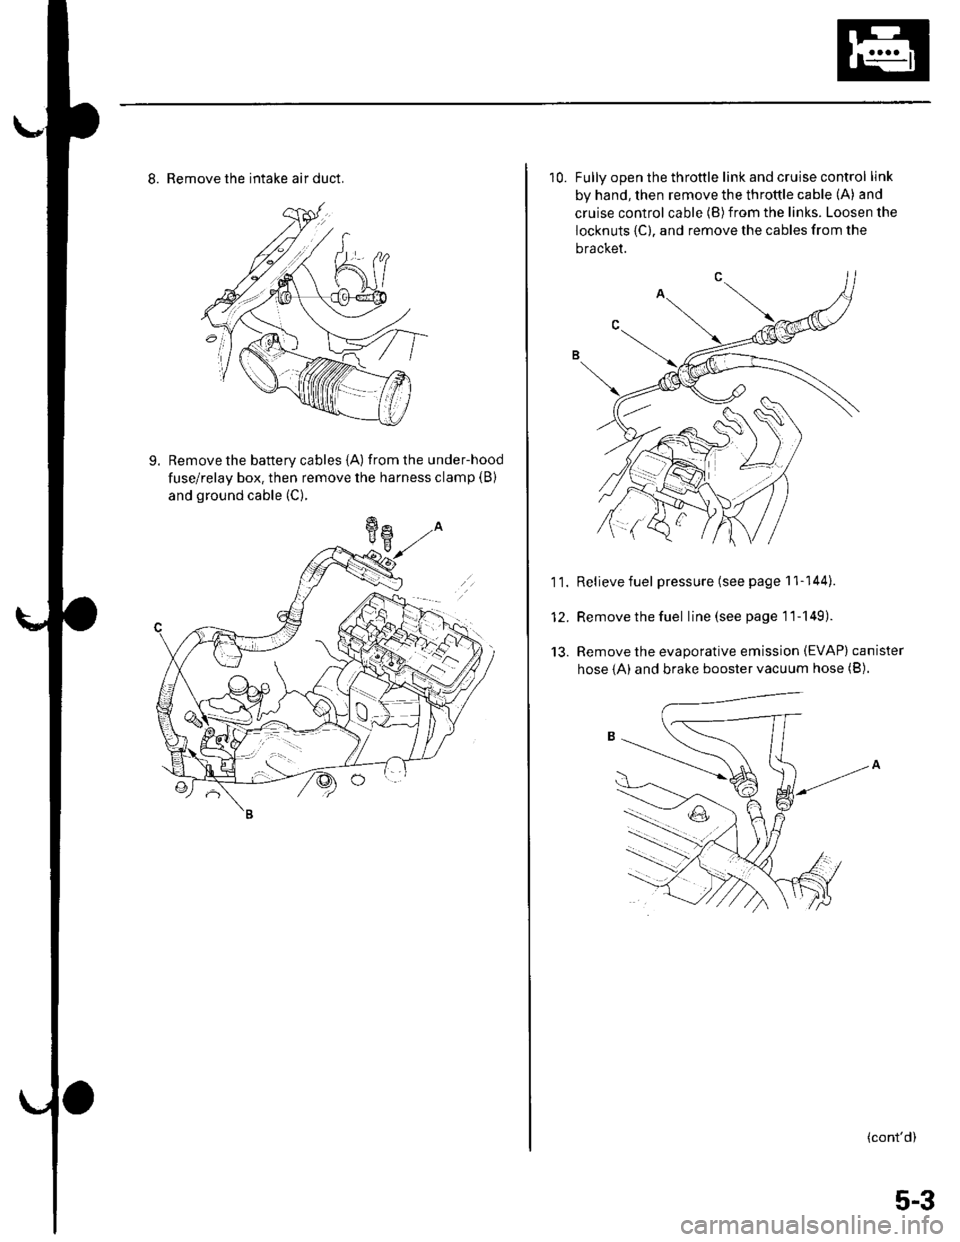 HONDA CIVIC 2003 7.G User Guide 8. Remove the intake air duct.
9. Remove the battery cables {A) fromthe under-hood
fuse/relay box. then remove the harness clamp (B)
and ground cable (C).
10. Fullv ooen the throttle link and cruise c